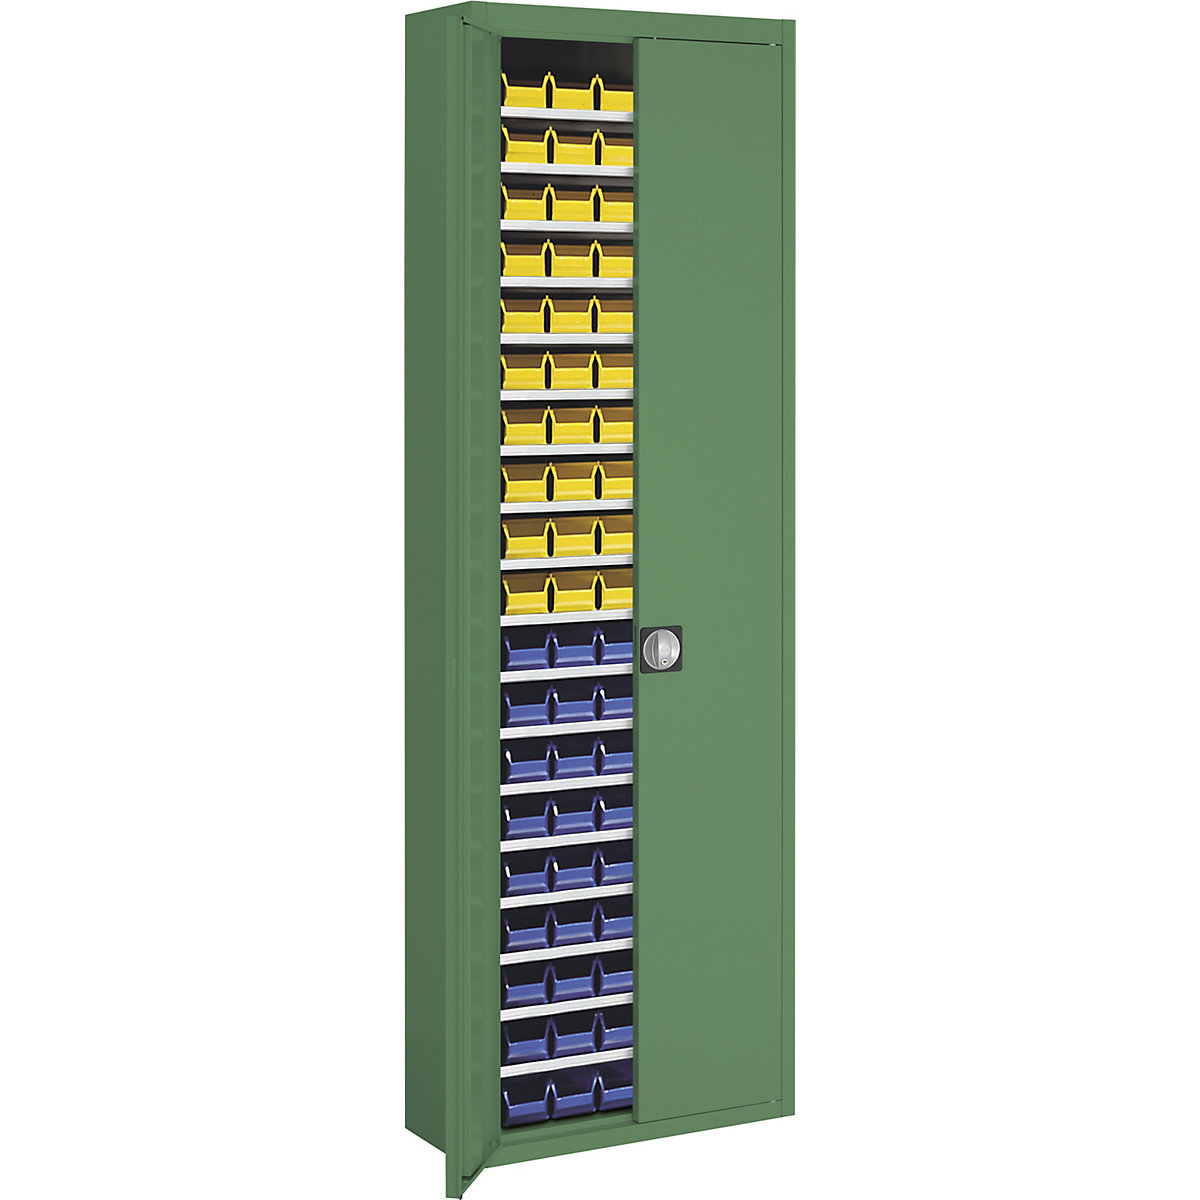 Storage cupboard with open fronted storage bins – mauser, HxWxD 2150 x 680 x 280 mm, single colour, green, 114 bins-3